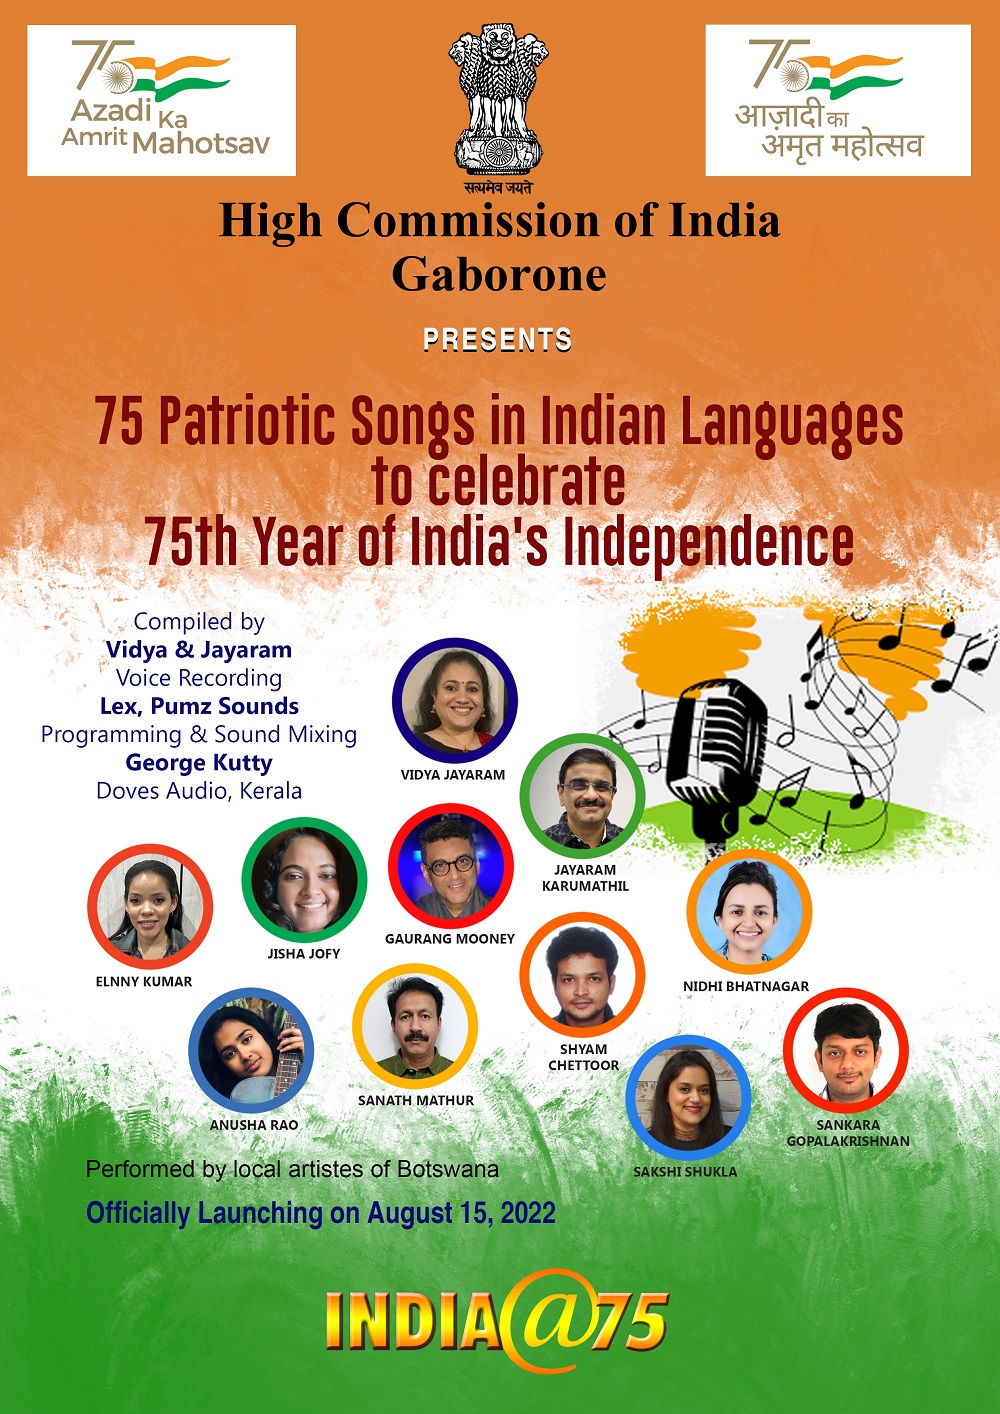 Release of 75 Patriotic Songs in 14 Indian Lauguages